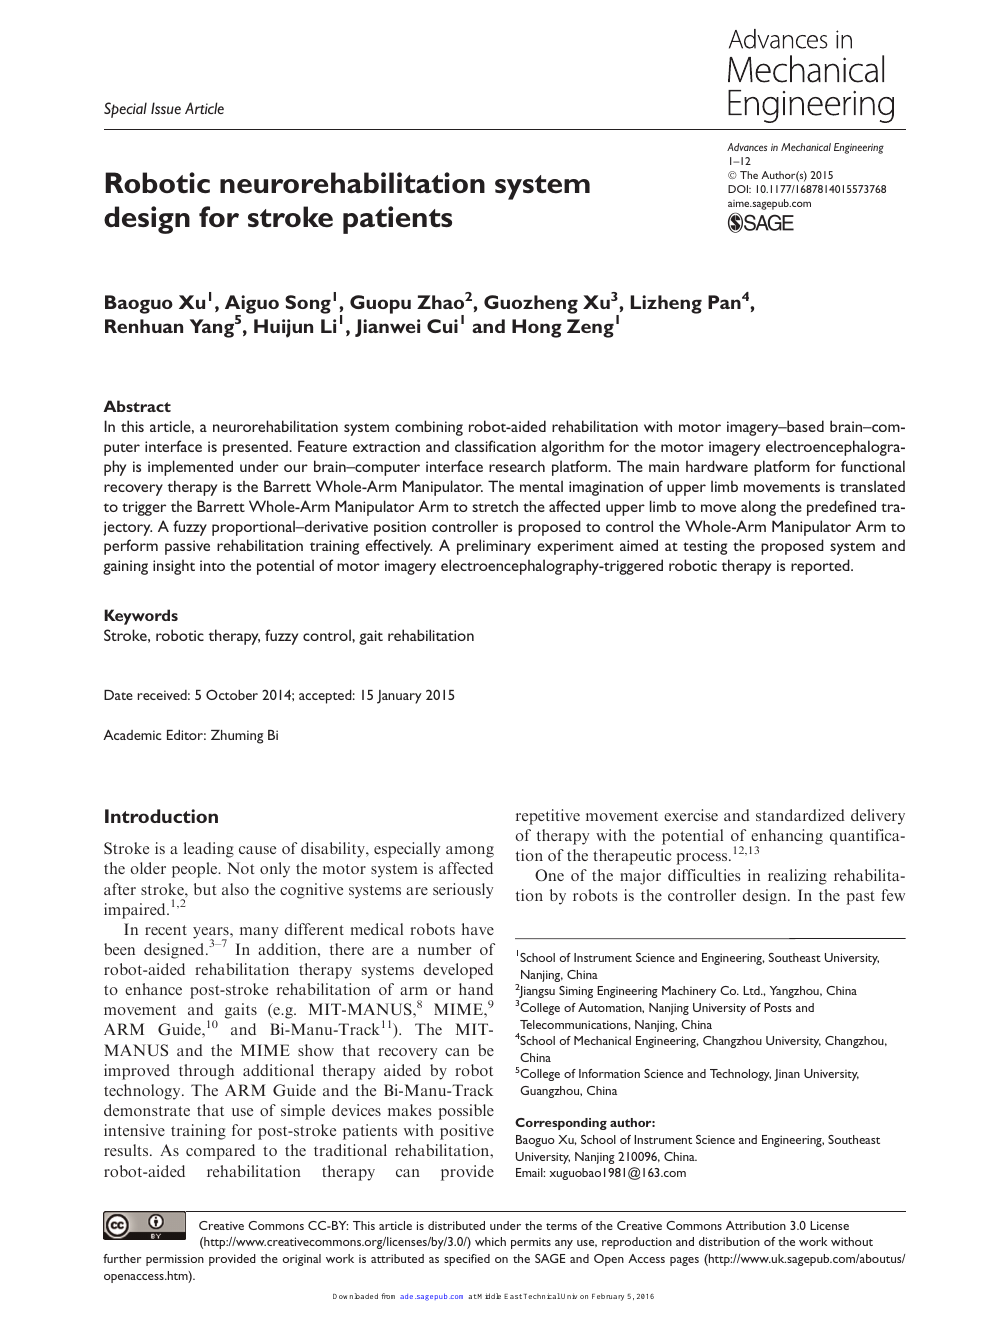 Robotic Neurorehabilitation System Design For Stroke Patients Topic Of Research Paper In Mechanical Engineering Download Scholarly Article Pdf And Read For Free On Cyberleninka Open Science Hub